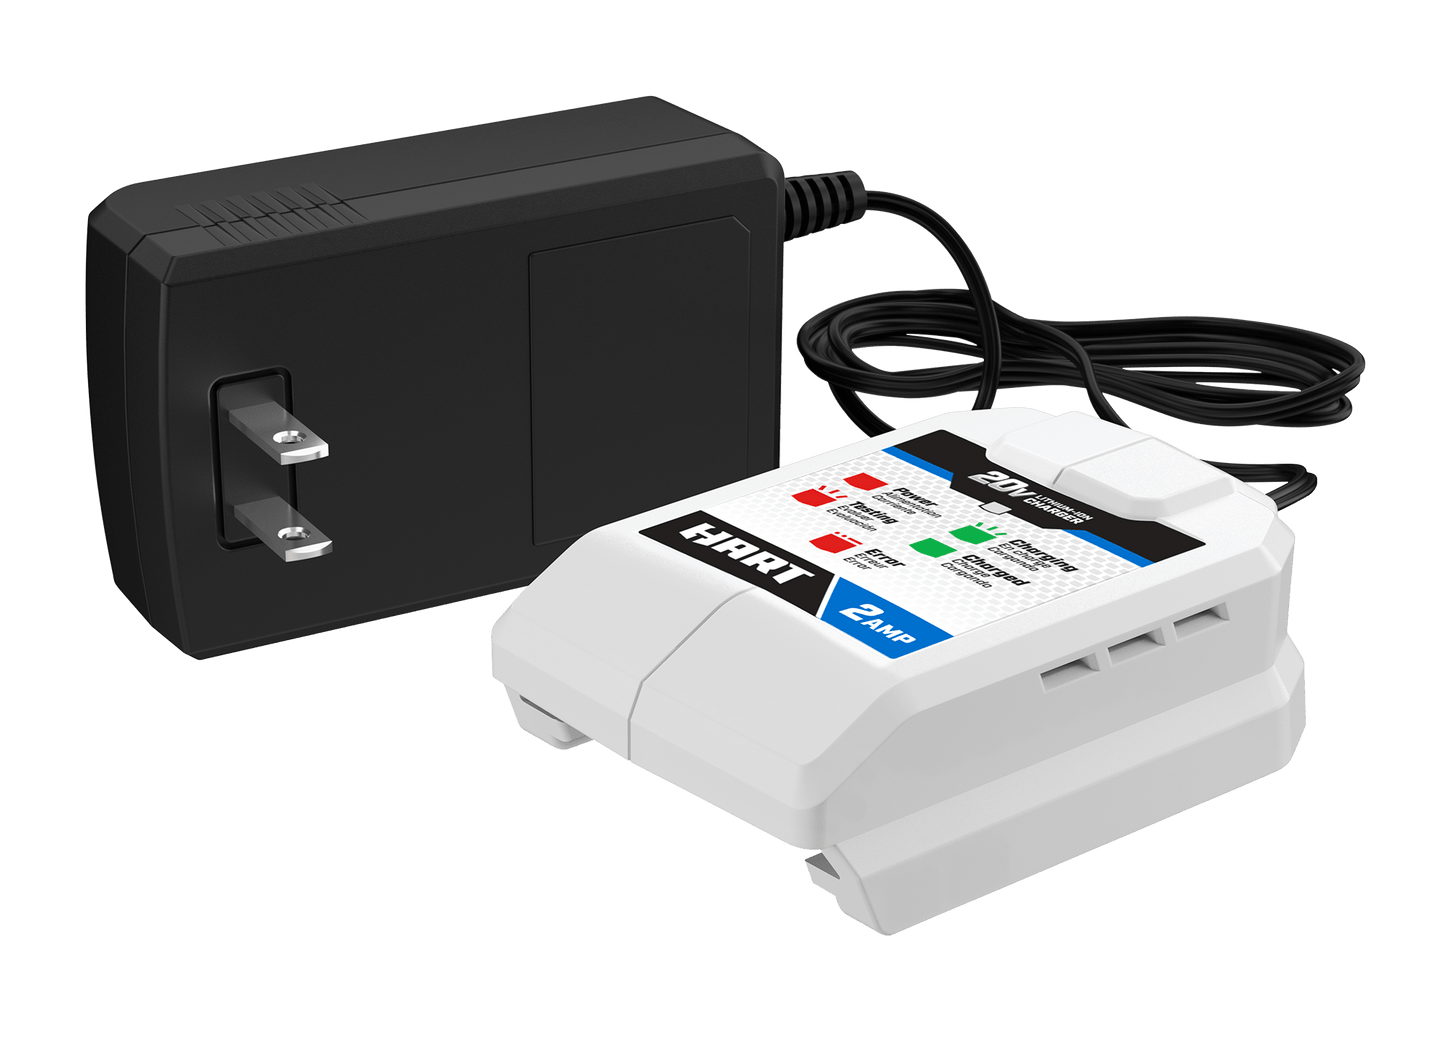 20V 2 AMP Fast Charger (Battery Not Included)